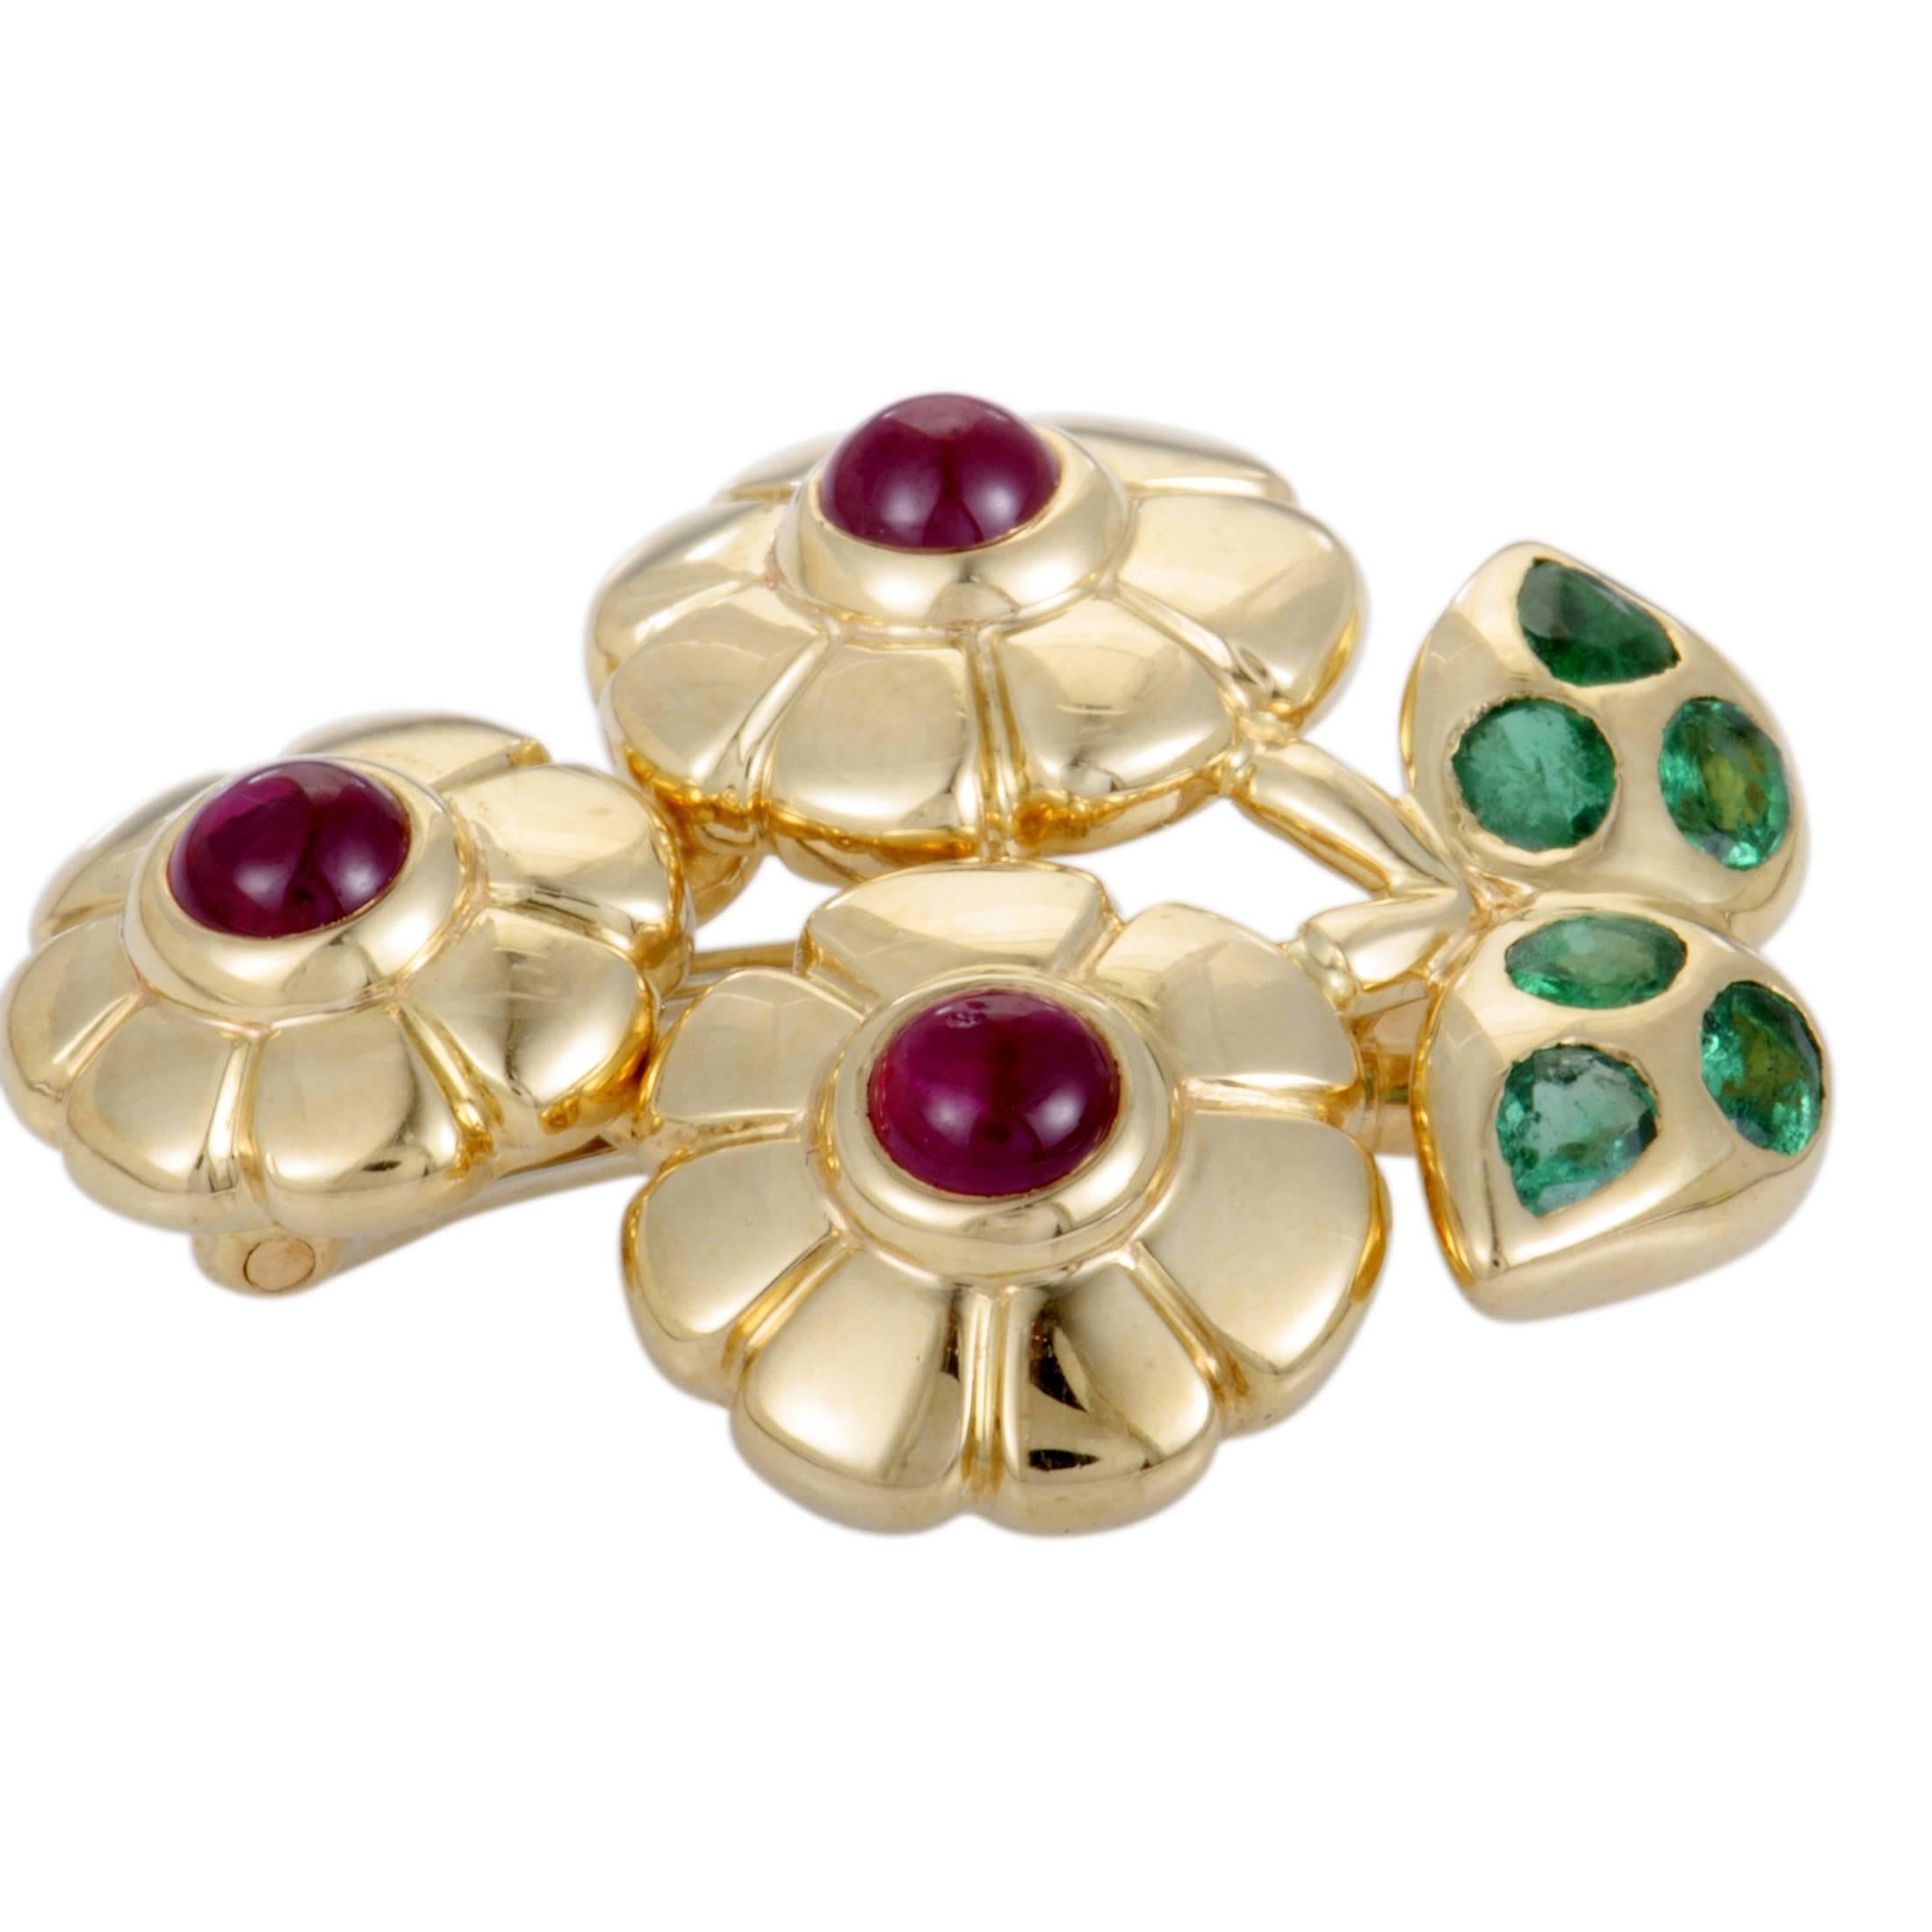 Depicting vivacious flowers in an enchantingly graceful manner, this vintage pin designed by Cartier offers a stunningly fashionable appearance. The pin is made of radiant 18K yellow gold and decorated with emeralds and rubies.
Dimension: 1.12